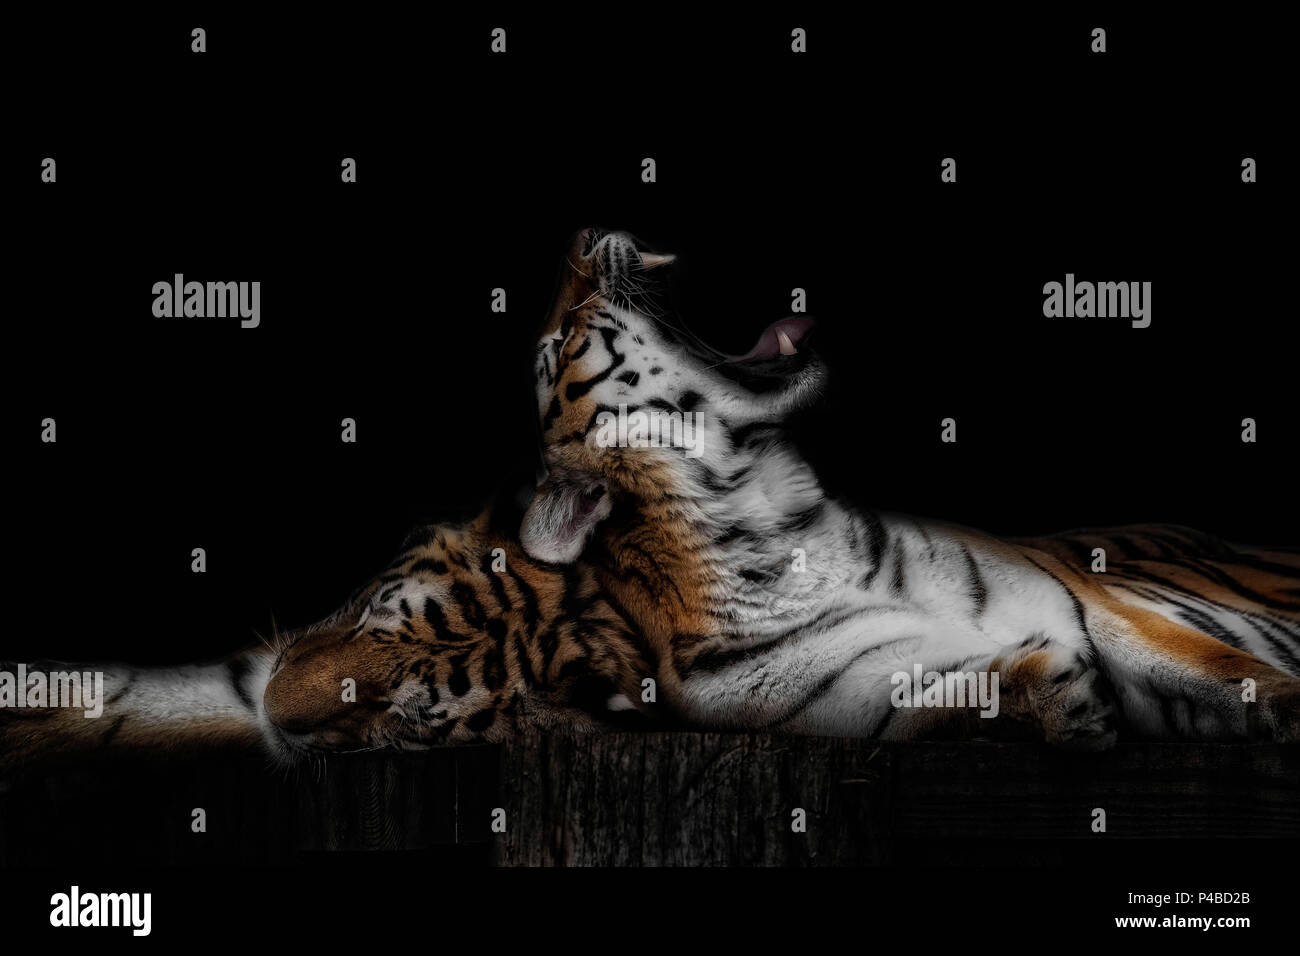 Big cat tiger yawn with fangs on black Stock Photo